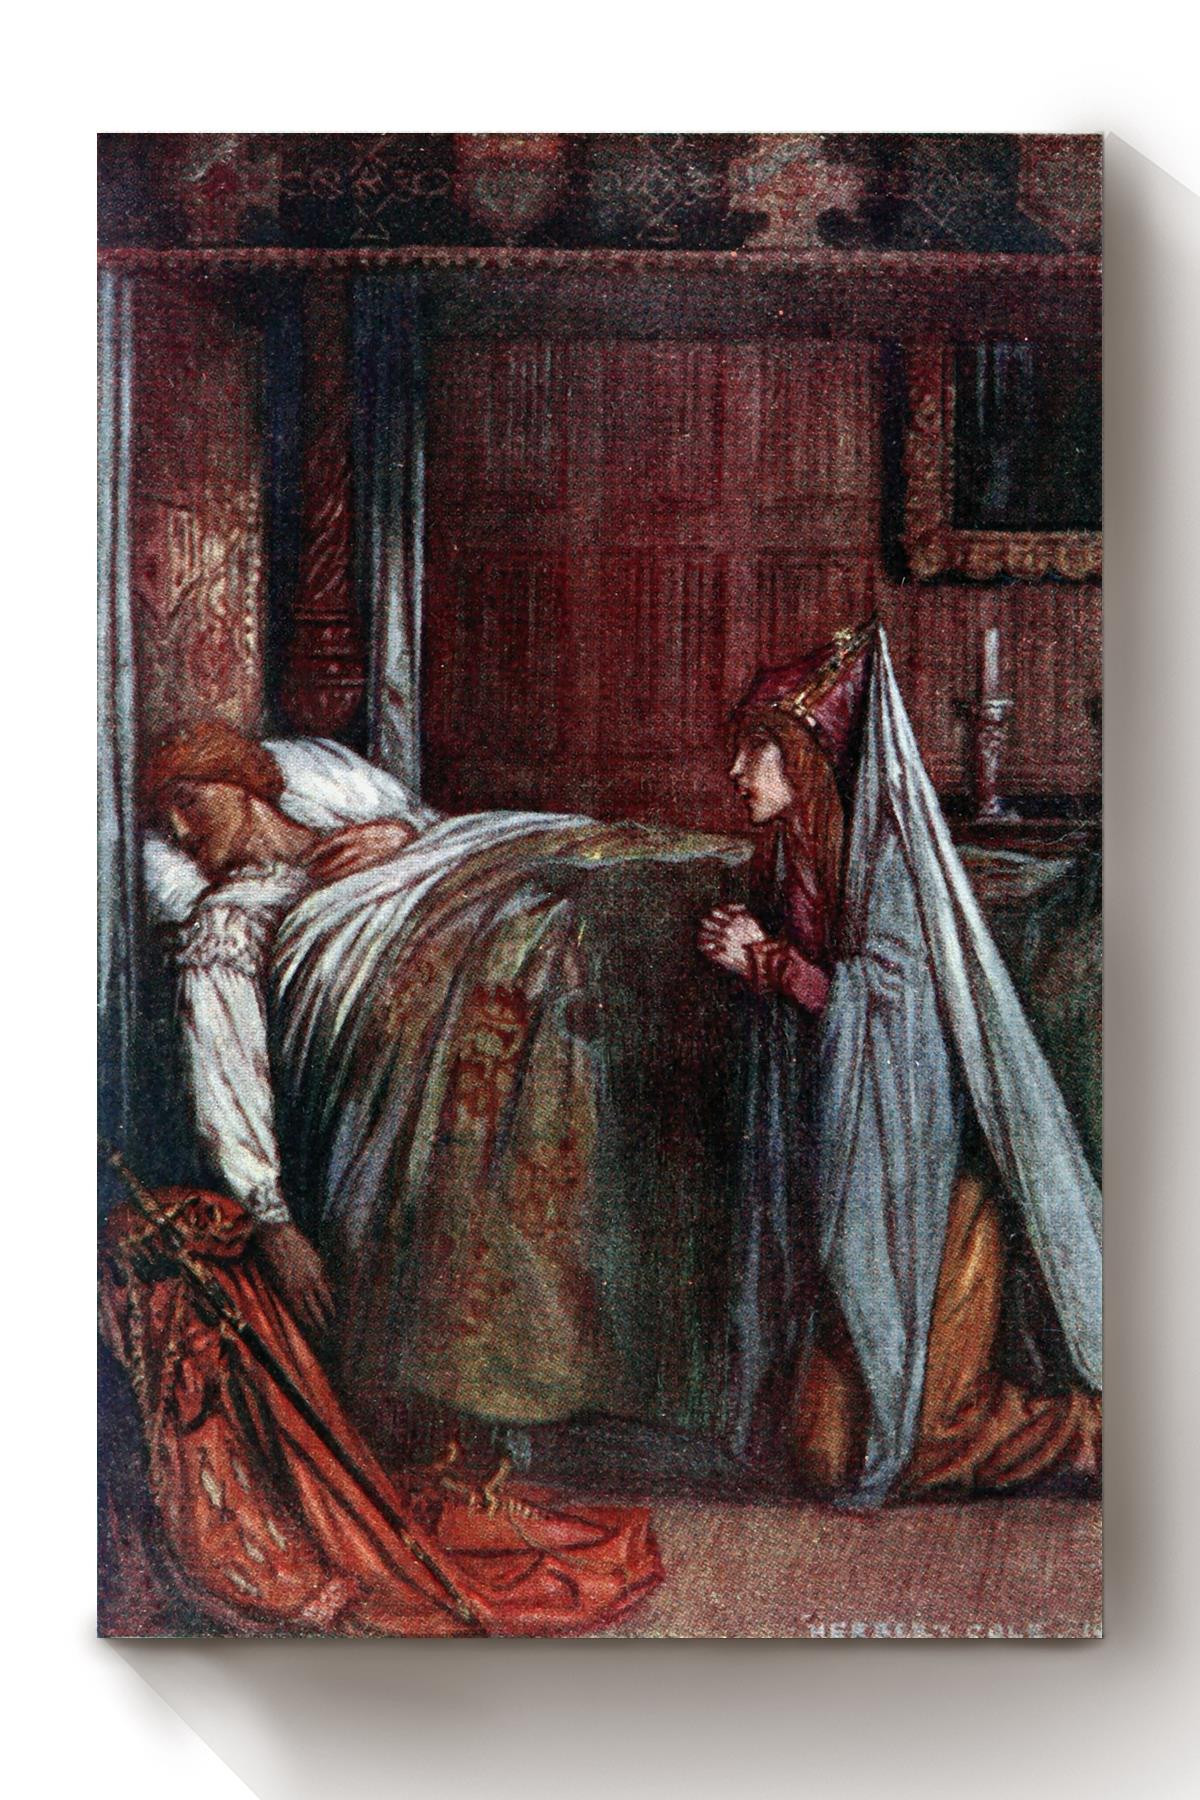 Fairy Gold A Book Of Old English Fairy Tales Illustrations By Herbert Cole 04 Canvas Wrapped Canvas 8x10